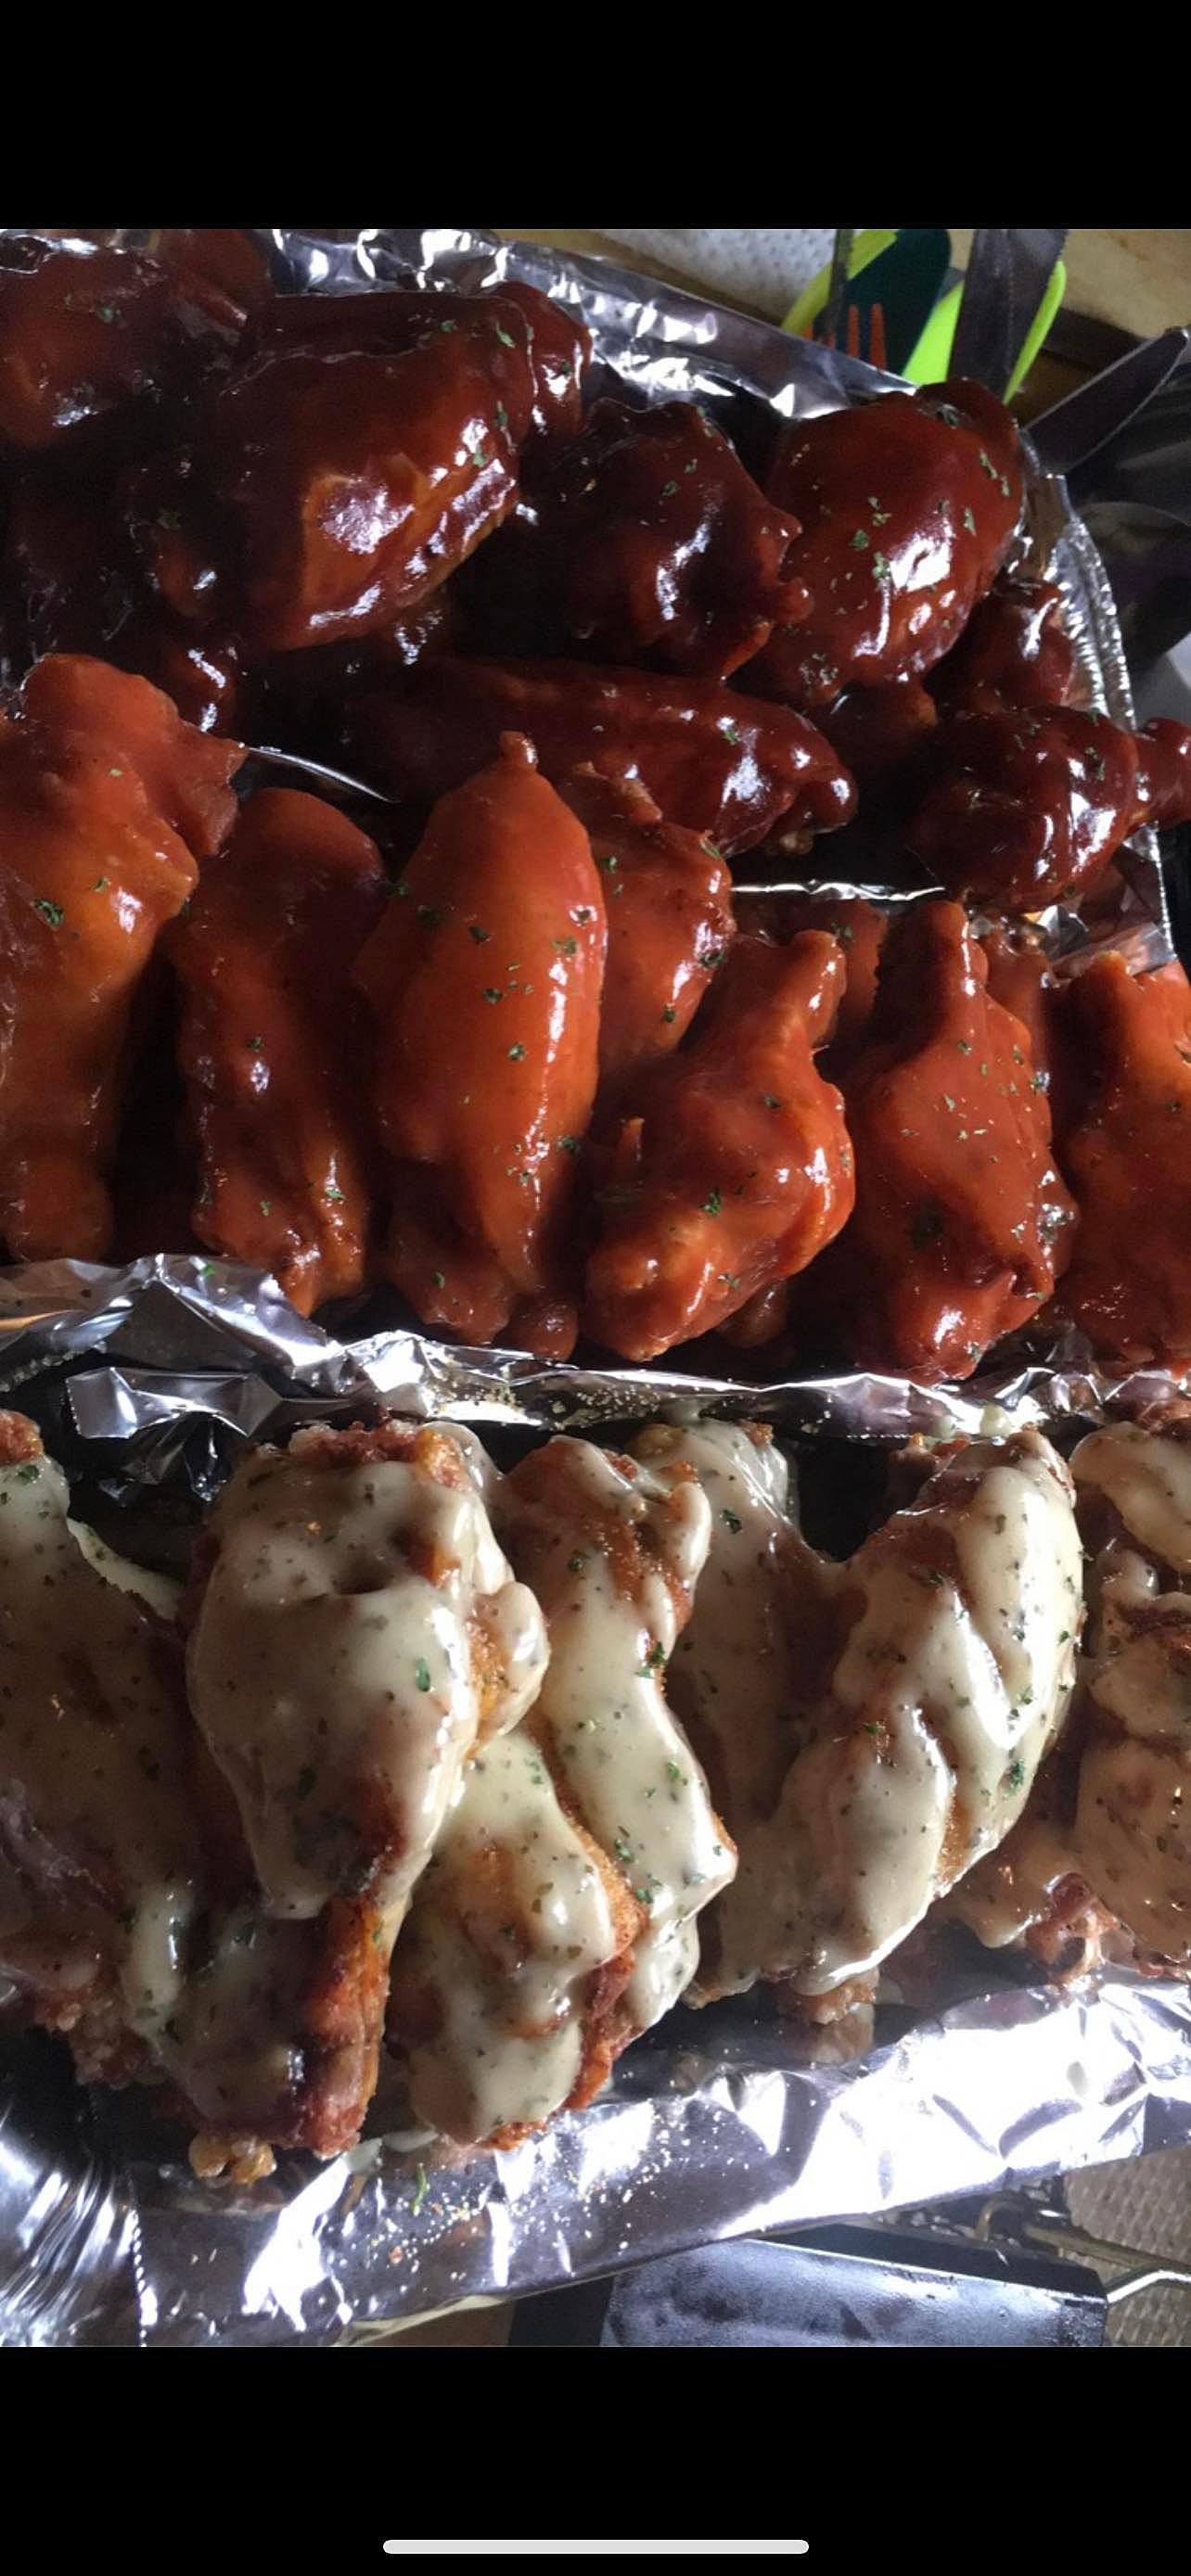 These Are the 8 Yummiest Wing Places to Try in Killeen, Texas